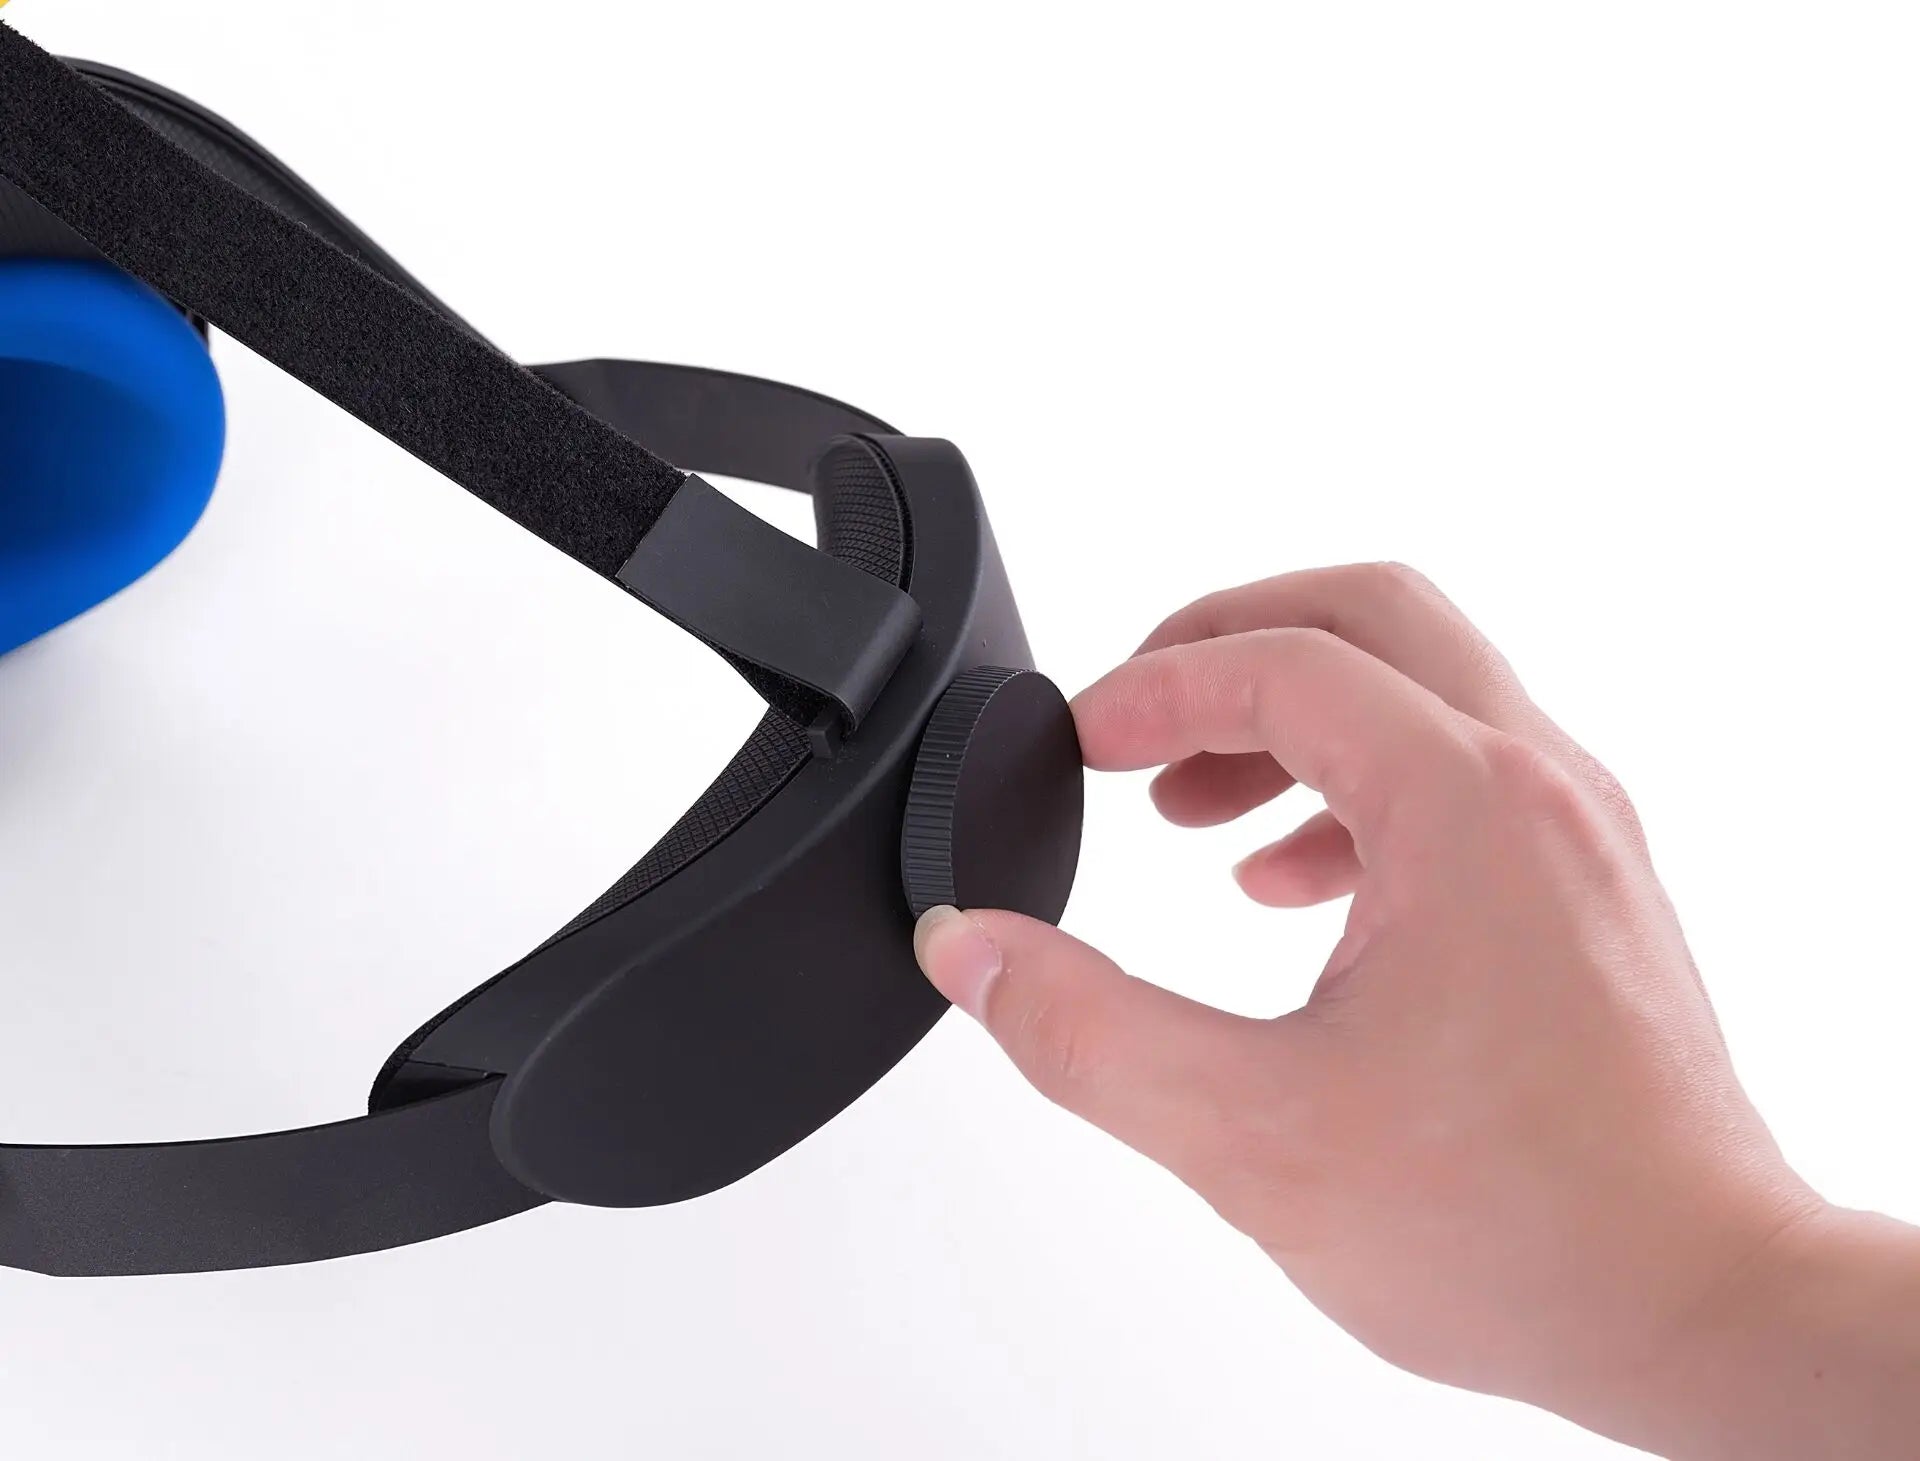 Gomrvr Strap For Oculus Quest Solves The Pressure Balance Of Face,Comfortable Adjustable Ergonomic Virtual Reality Accessories